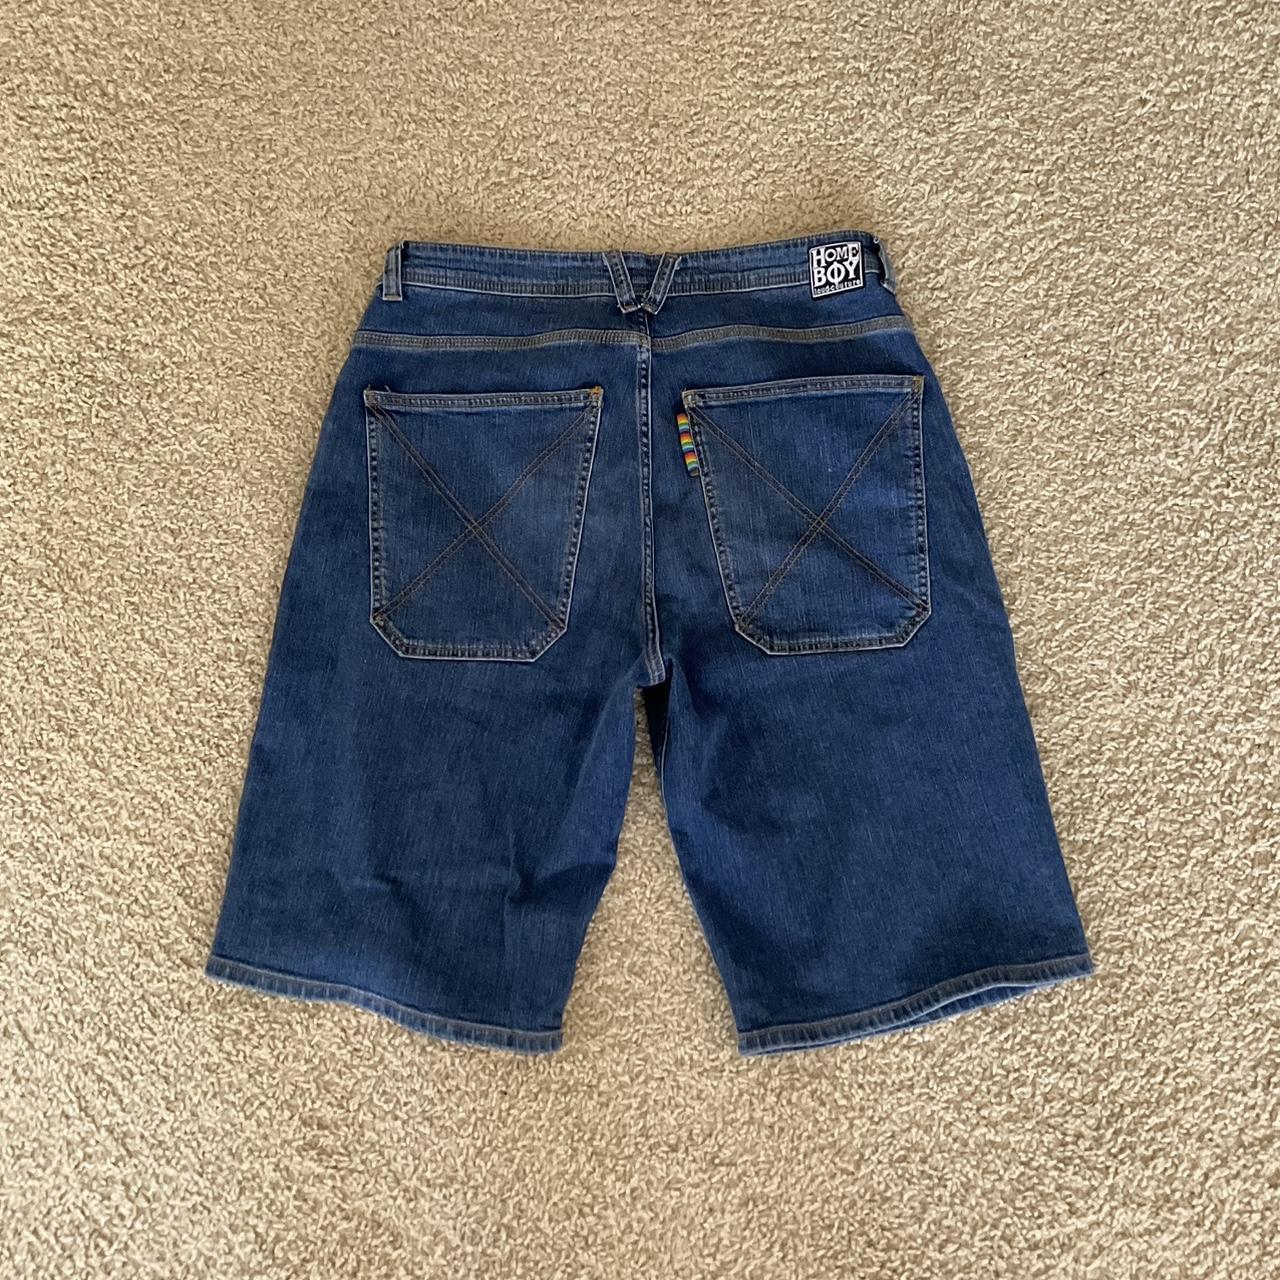 Homeboy xtra jorts Excellent condition no flaws or... - Depop